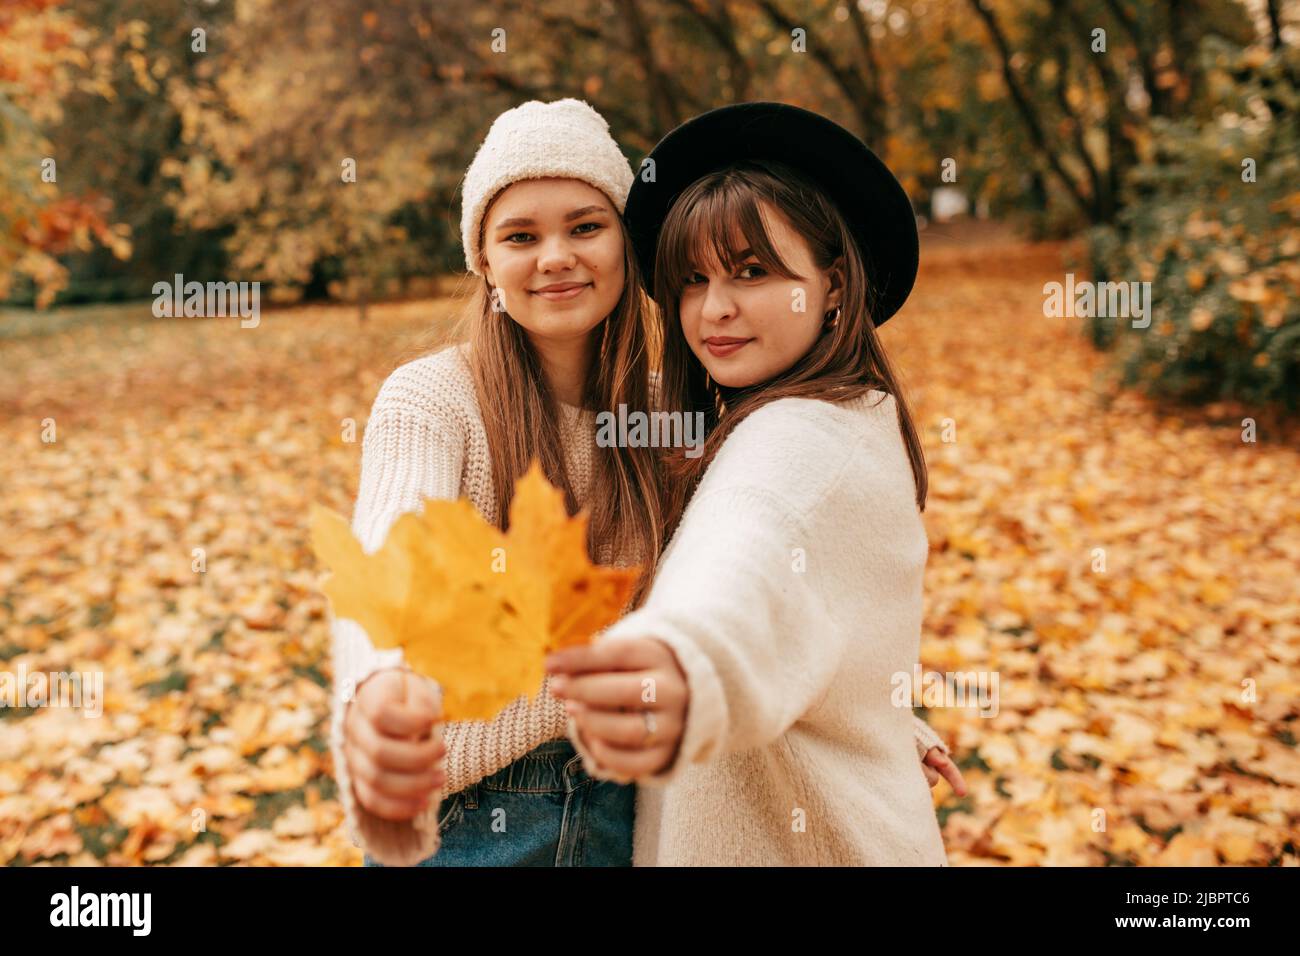 Beautiful young women enjoy their time in autumn park against background of bright trees. Golden autumn. Holidays. Fallen leaves. Female friendship Stock Photo